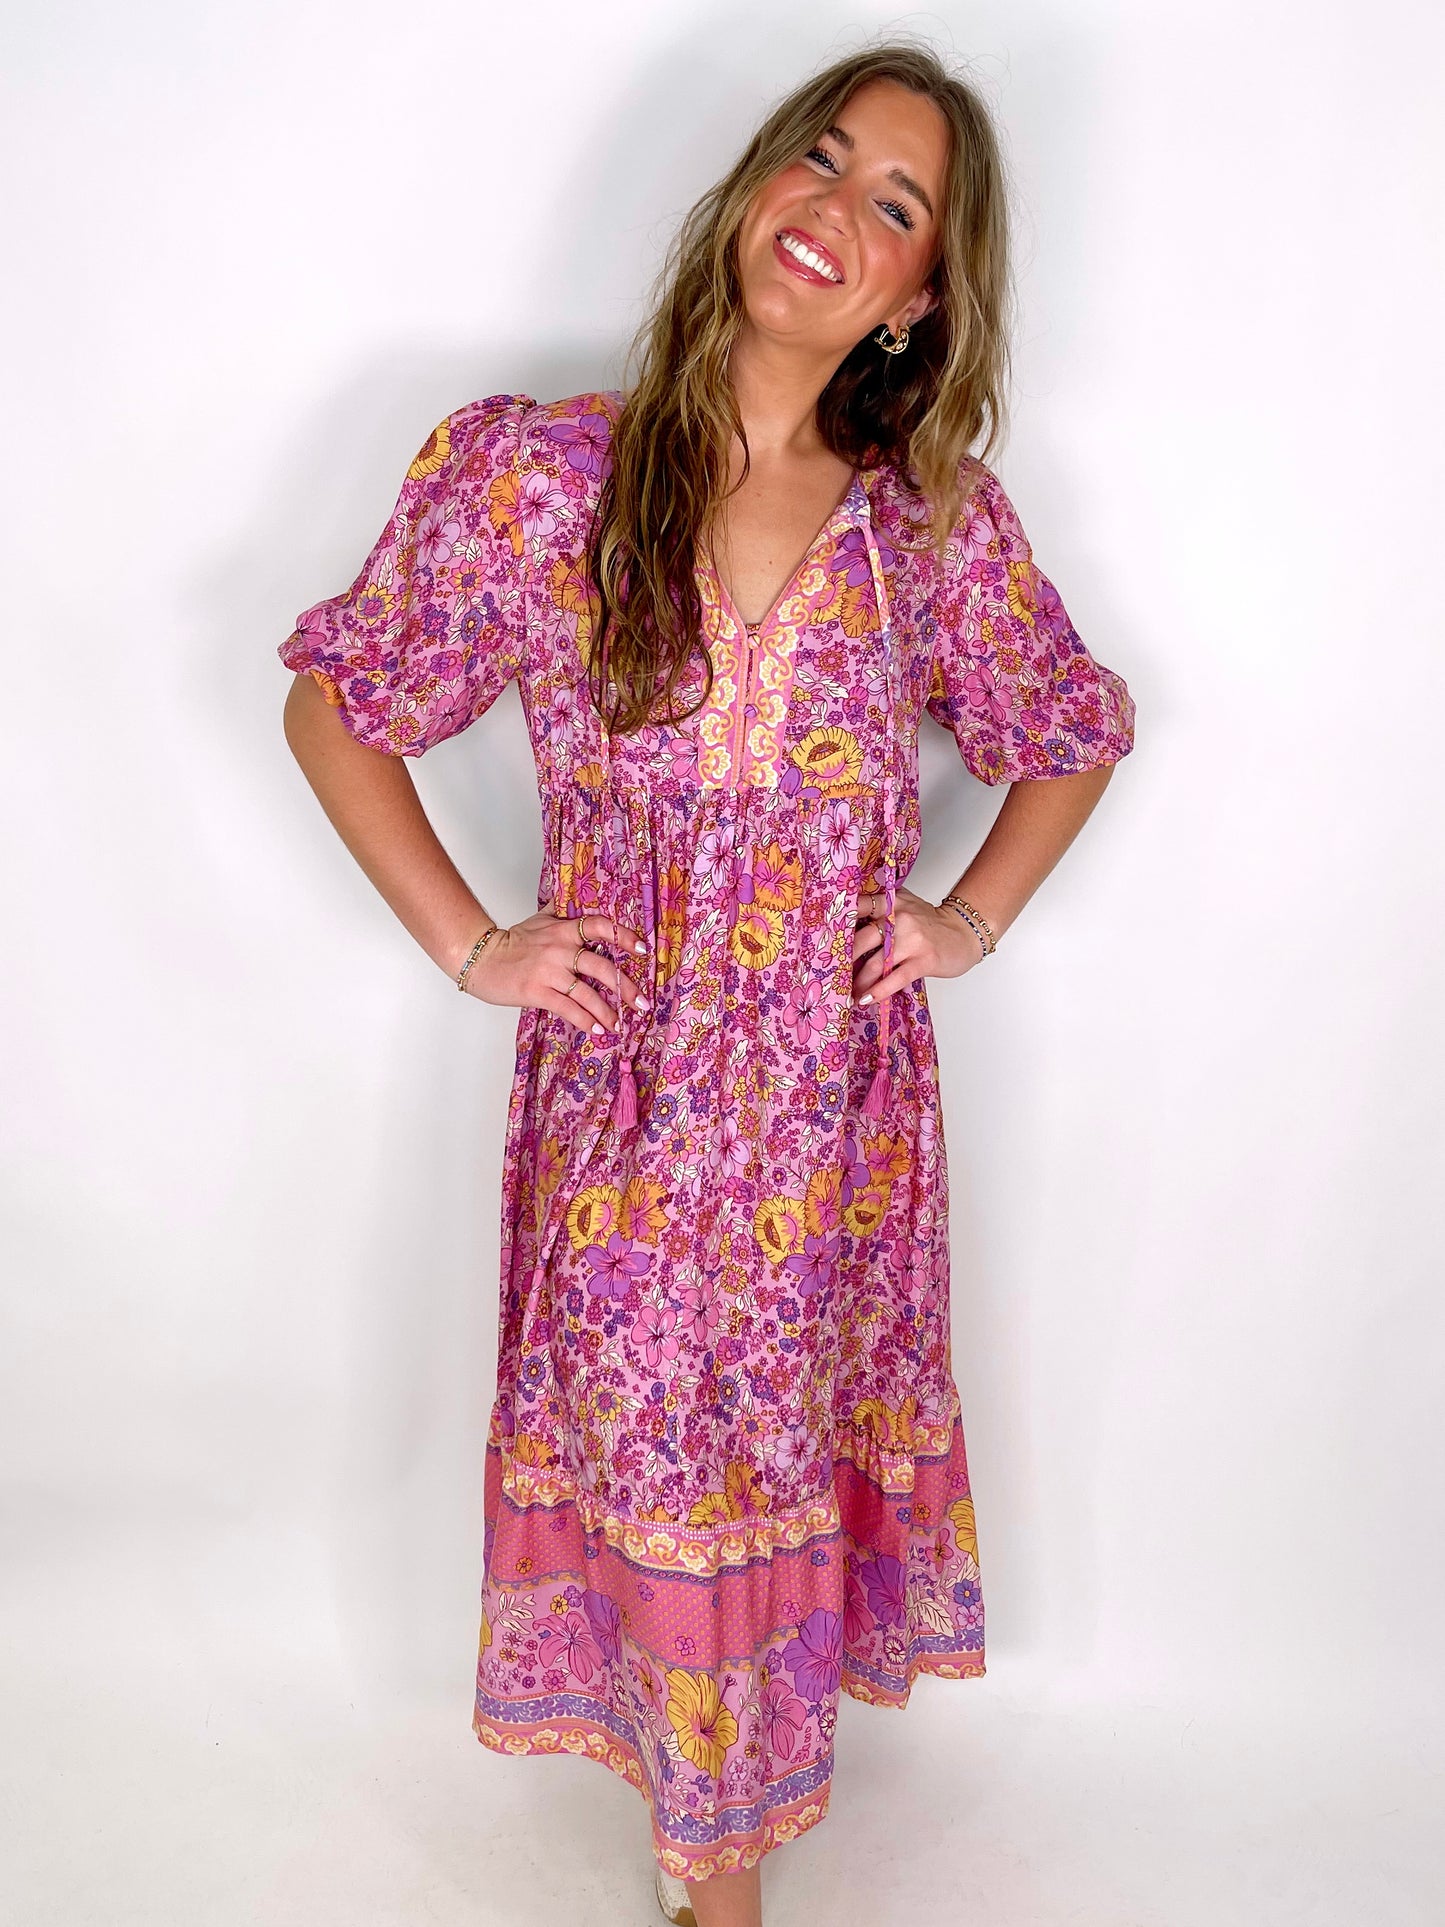 The Sadie Maxi Dress-Maxi Dress-Umgee-The Village Shoppe, Women’s Fashion Boutique, Shop Online and In Store - Located in Muscle Shoals, AL.